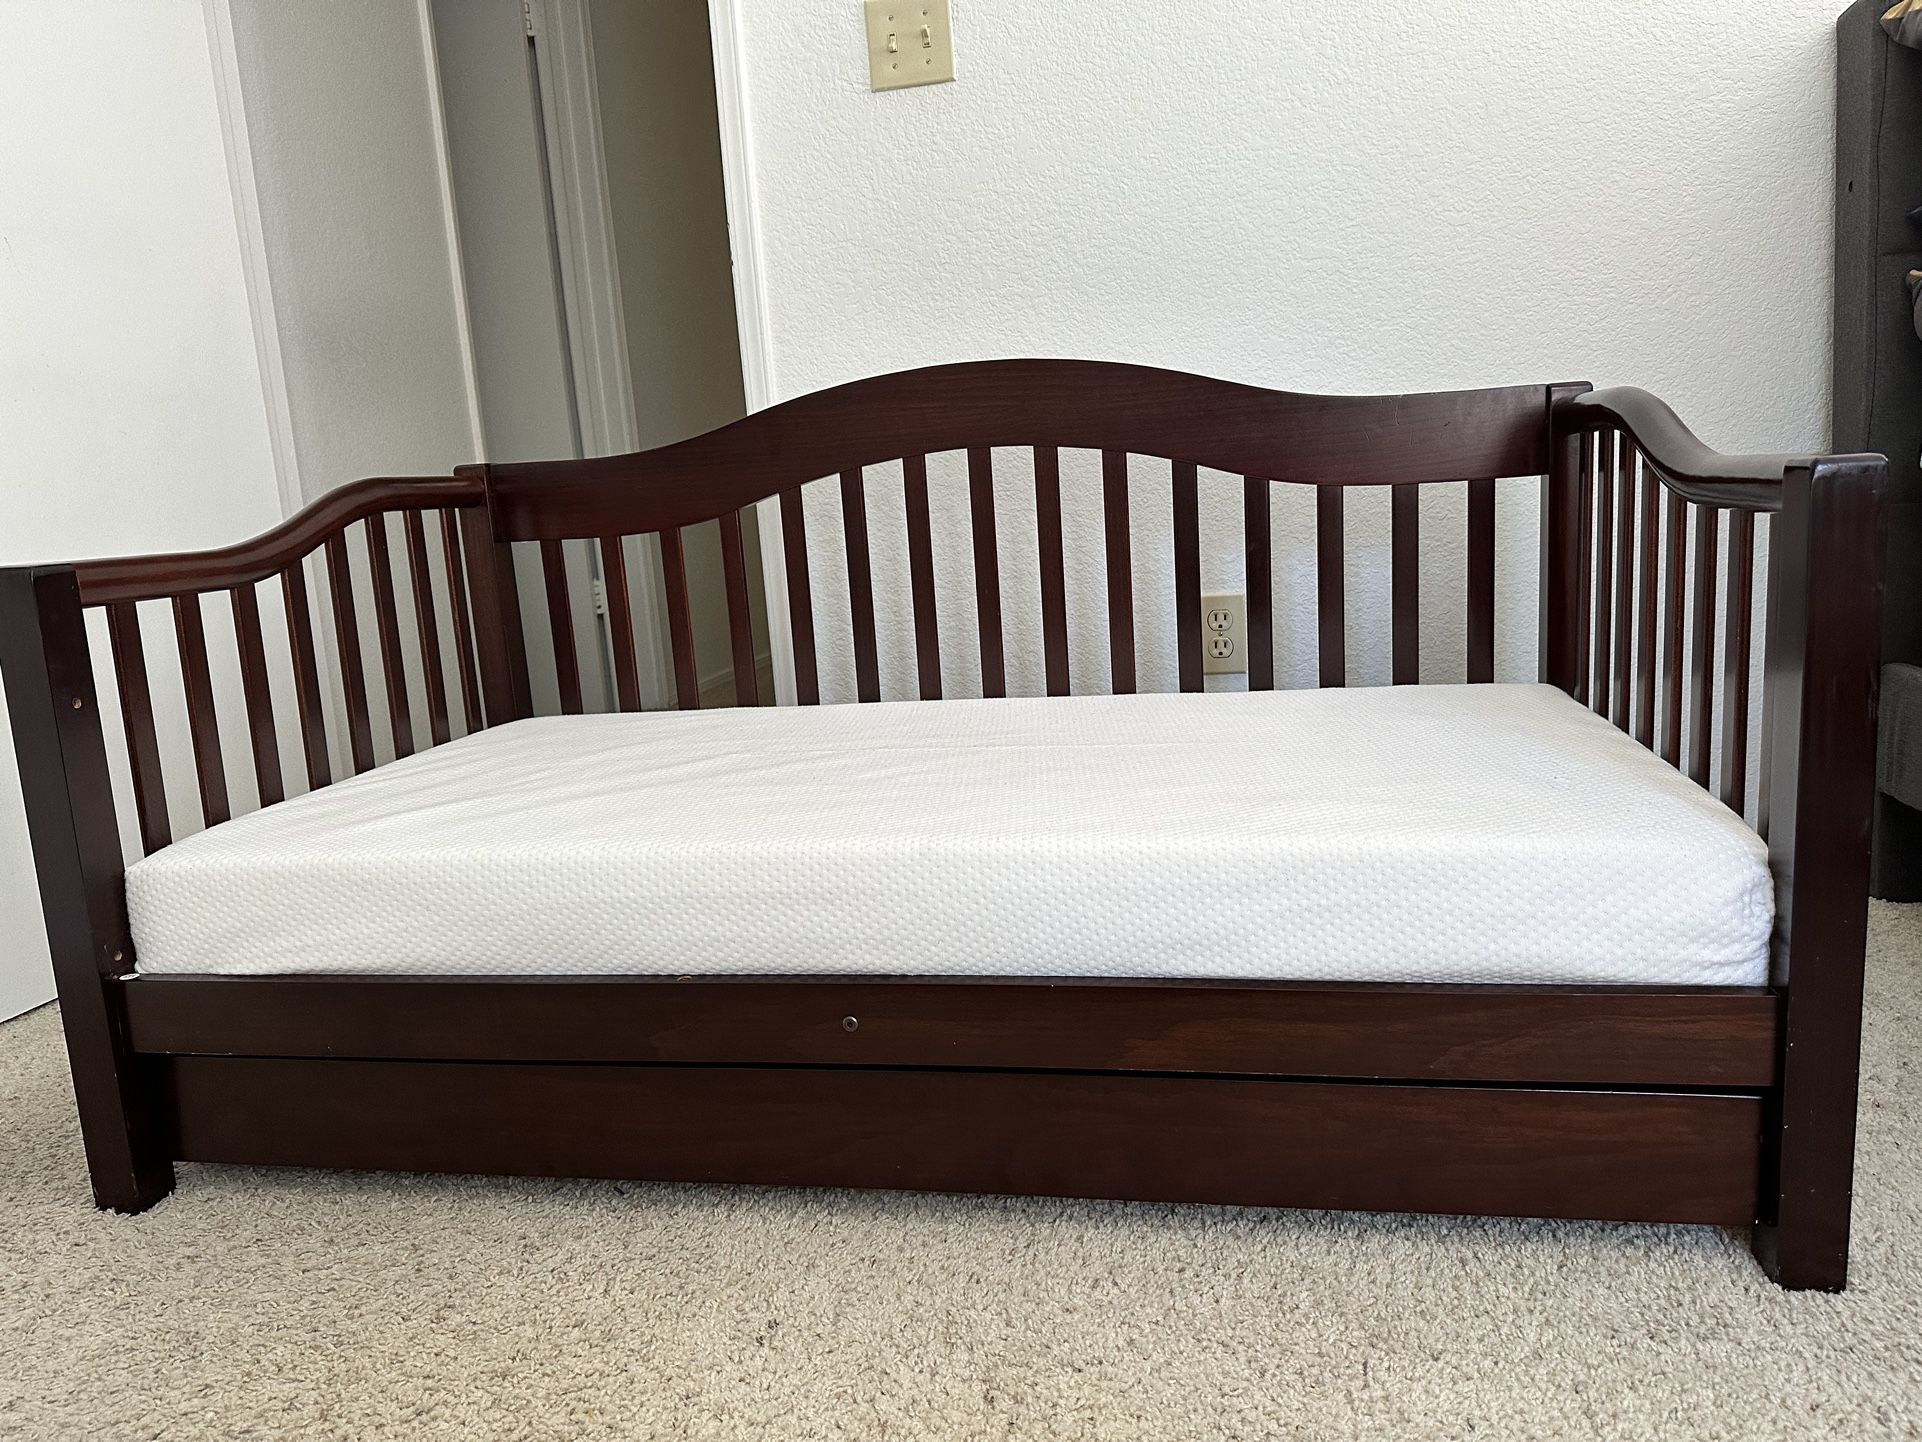 Toddler Day Bed  With Mattress (Dream On Me Toddler Day Bed In Espresso)